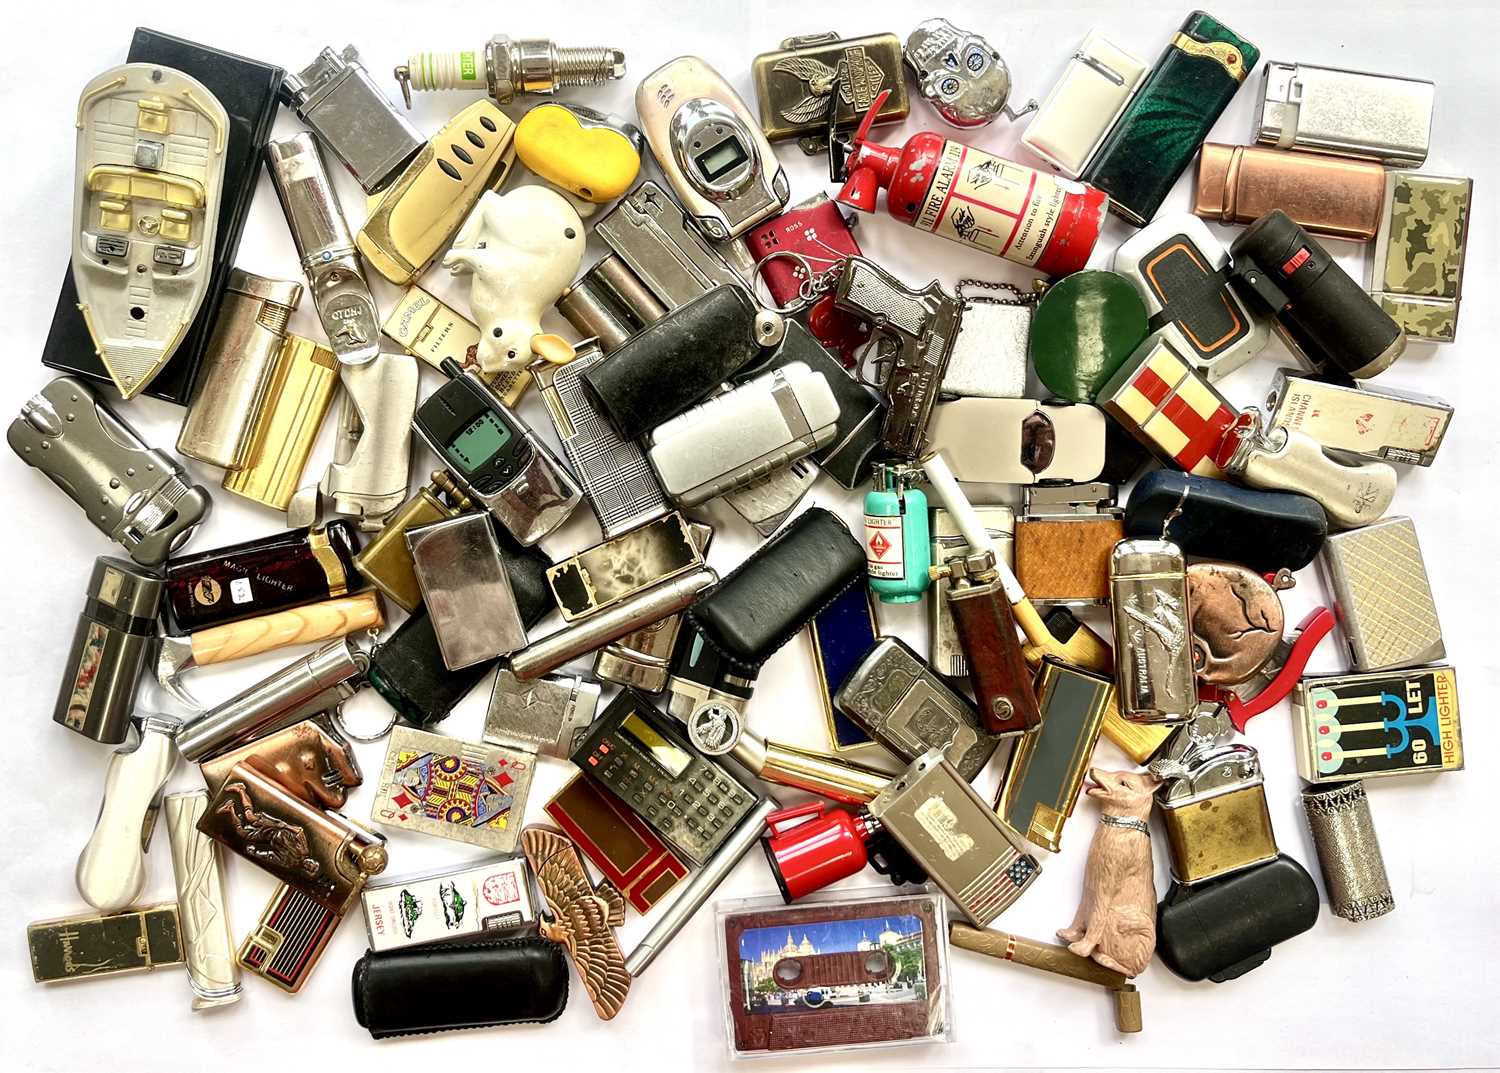 A collection of novelty gas lighters